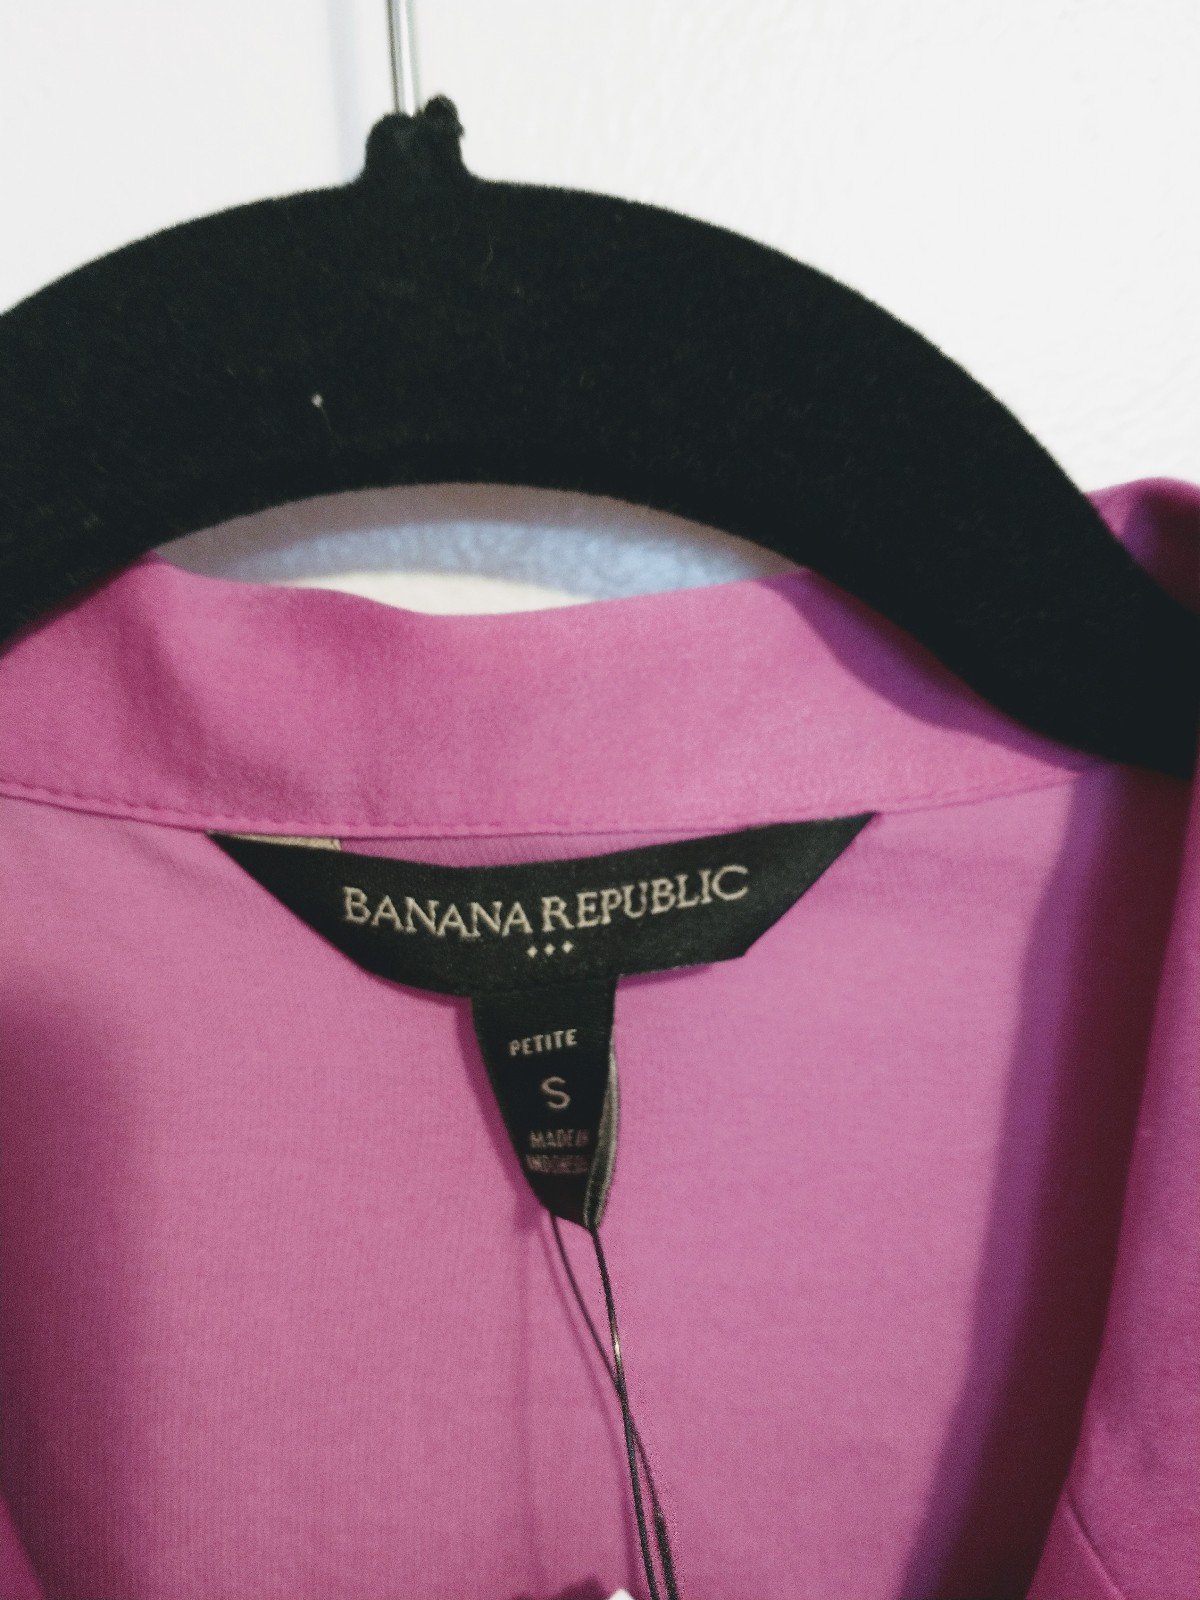 High quality NWT Banana Republic pink button up blouse size petite small, $65 HqoKVWlCE Wholesale